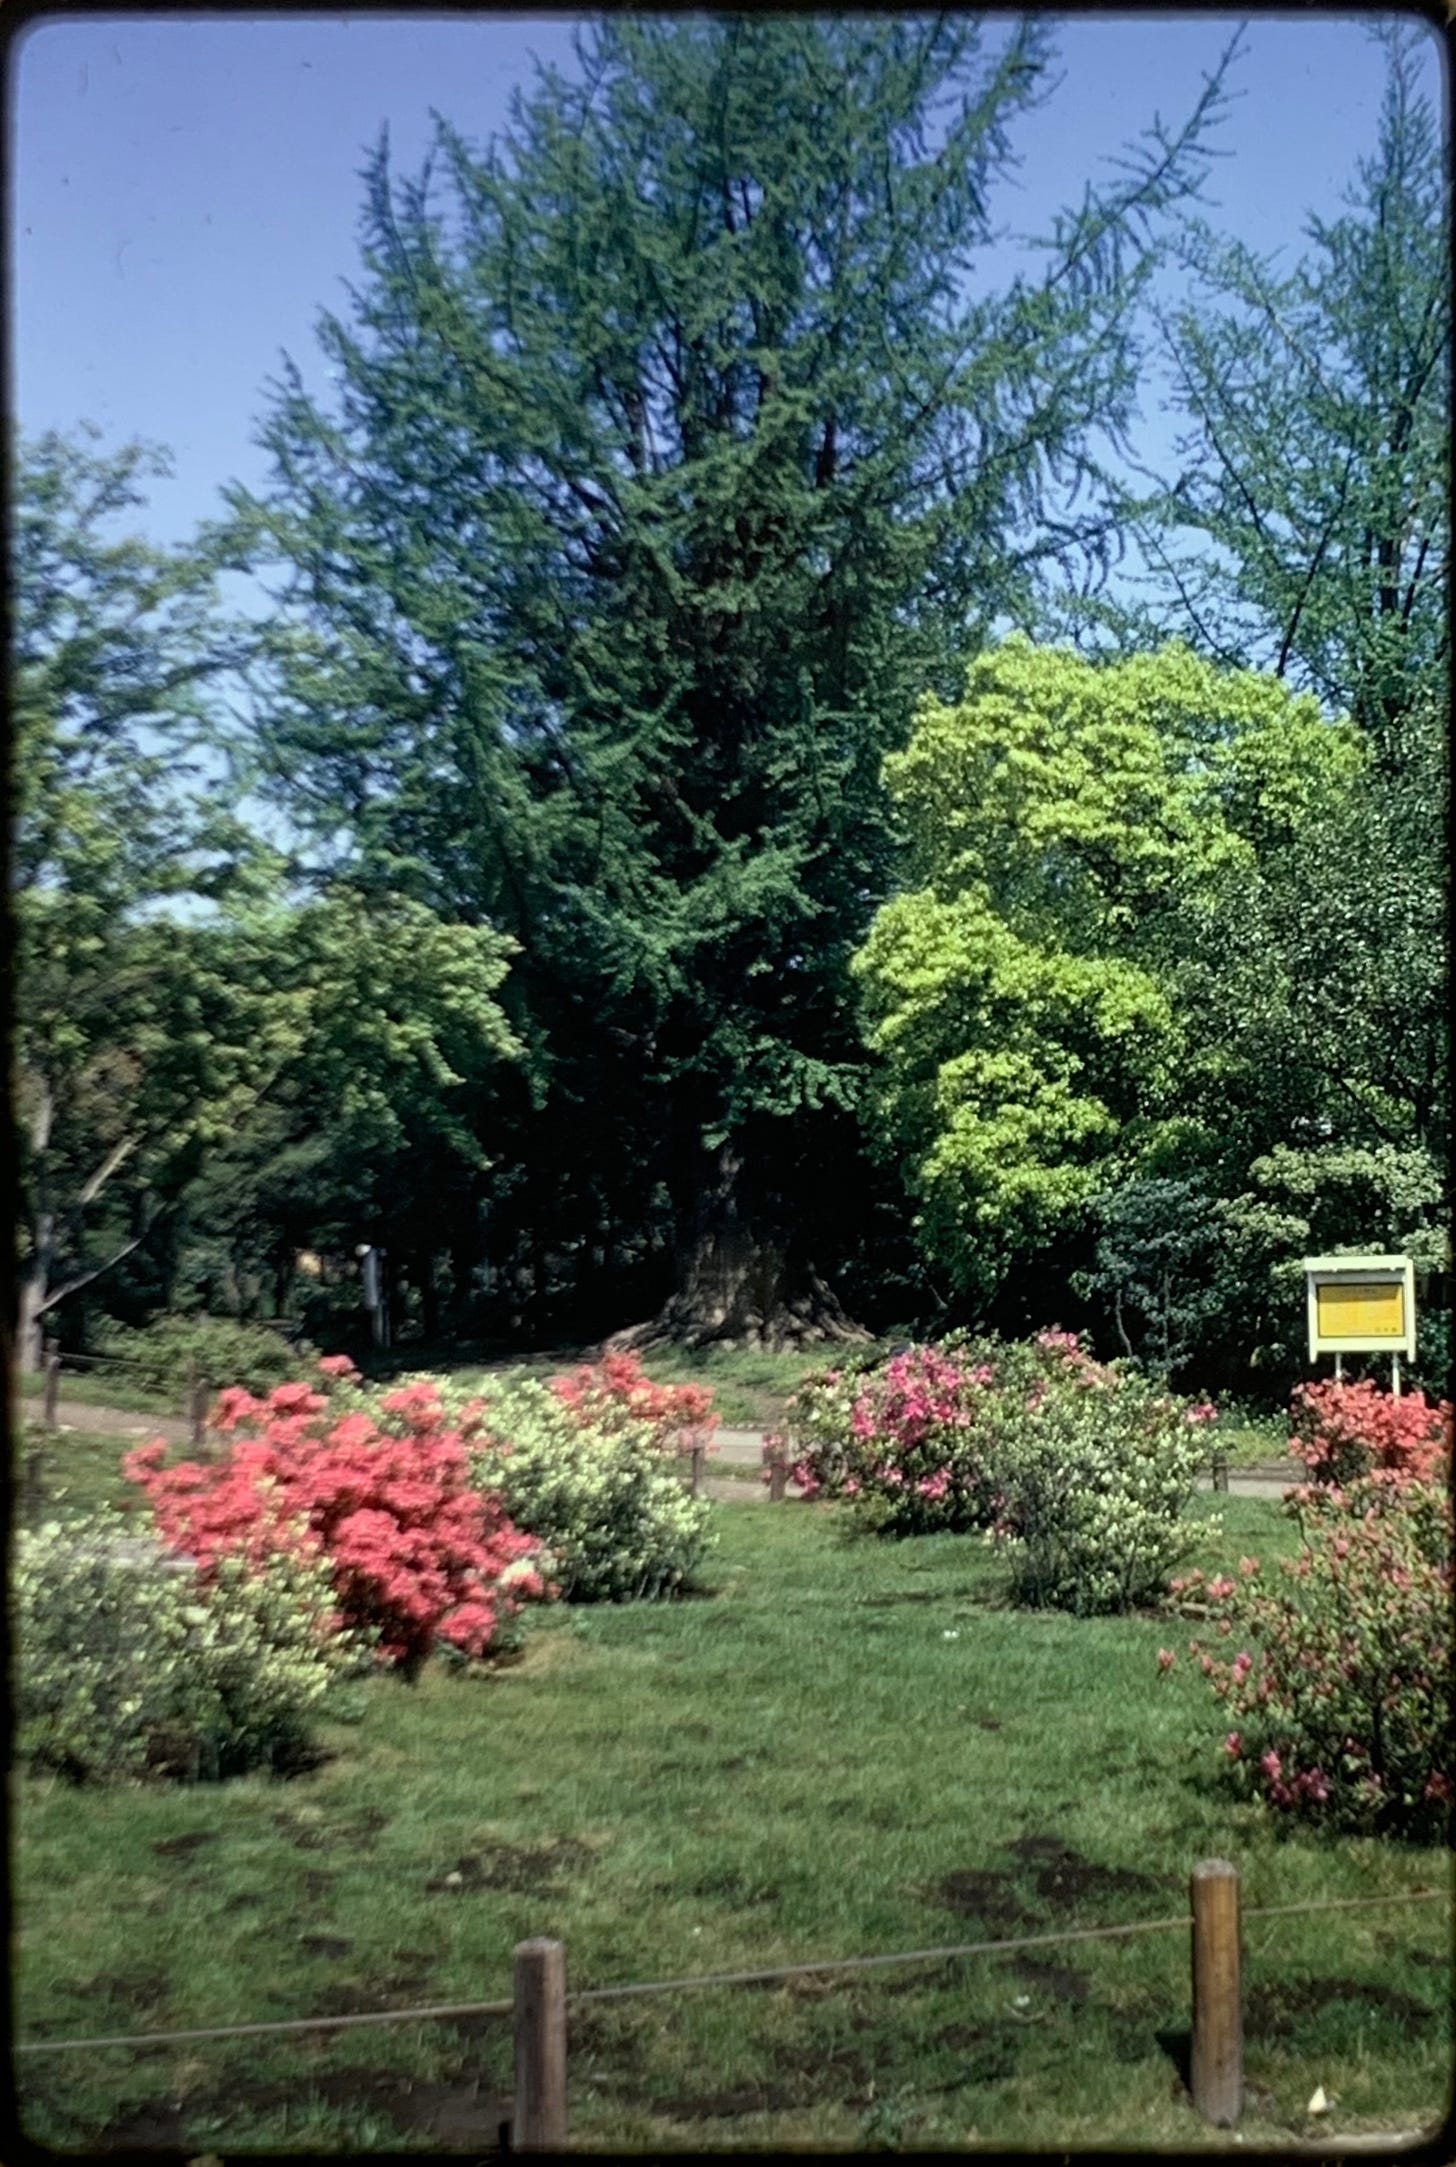 A large green Ginkgo tree with pink Azalea plantings in front.